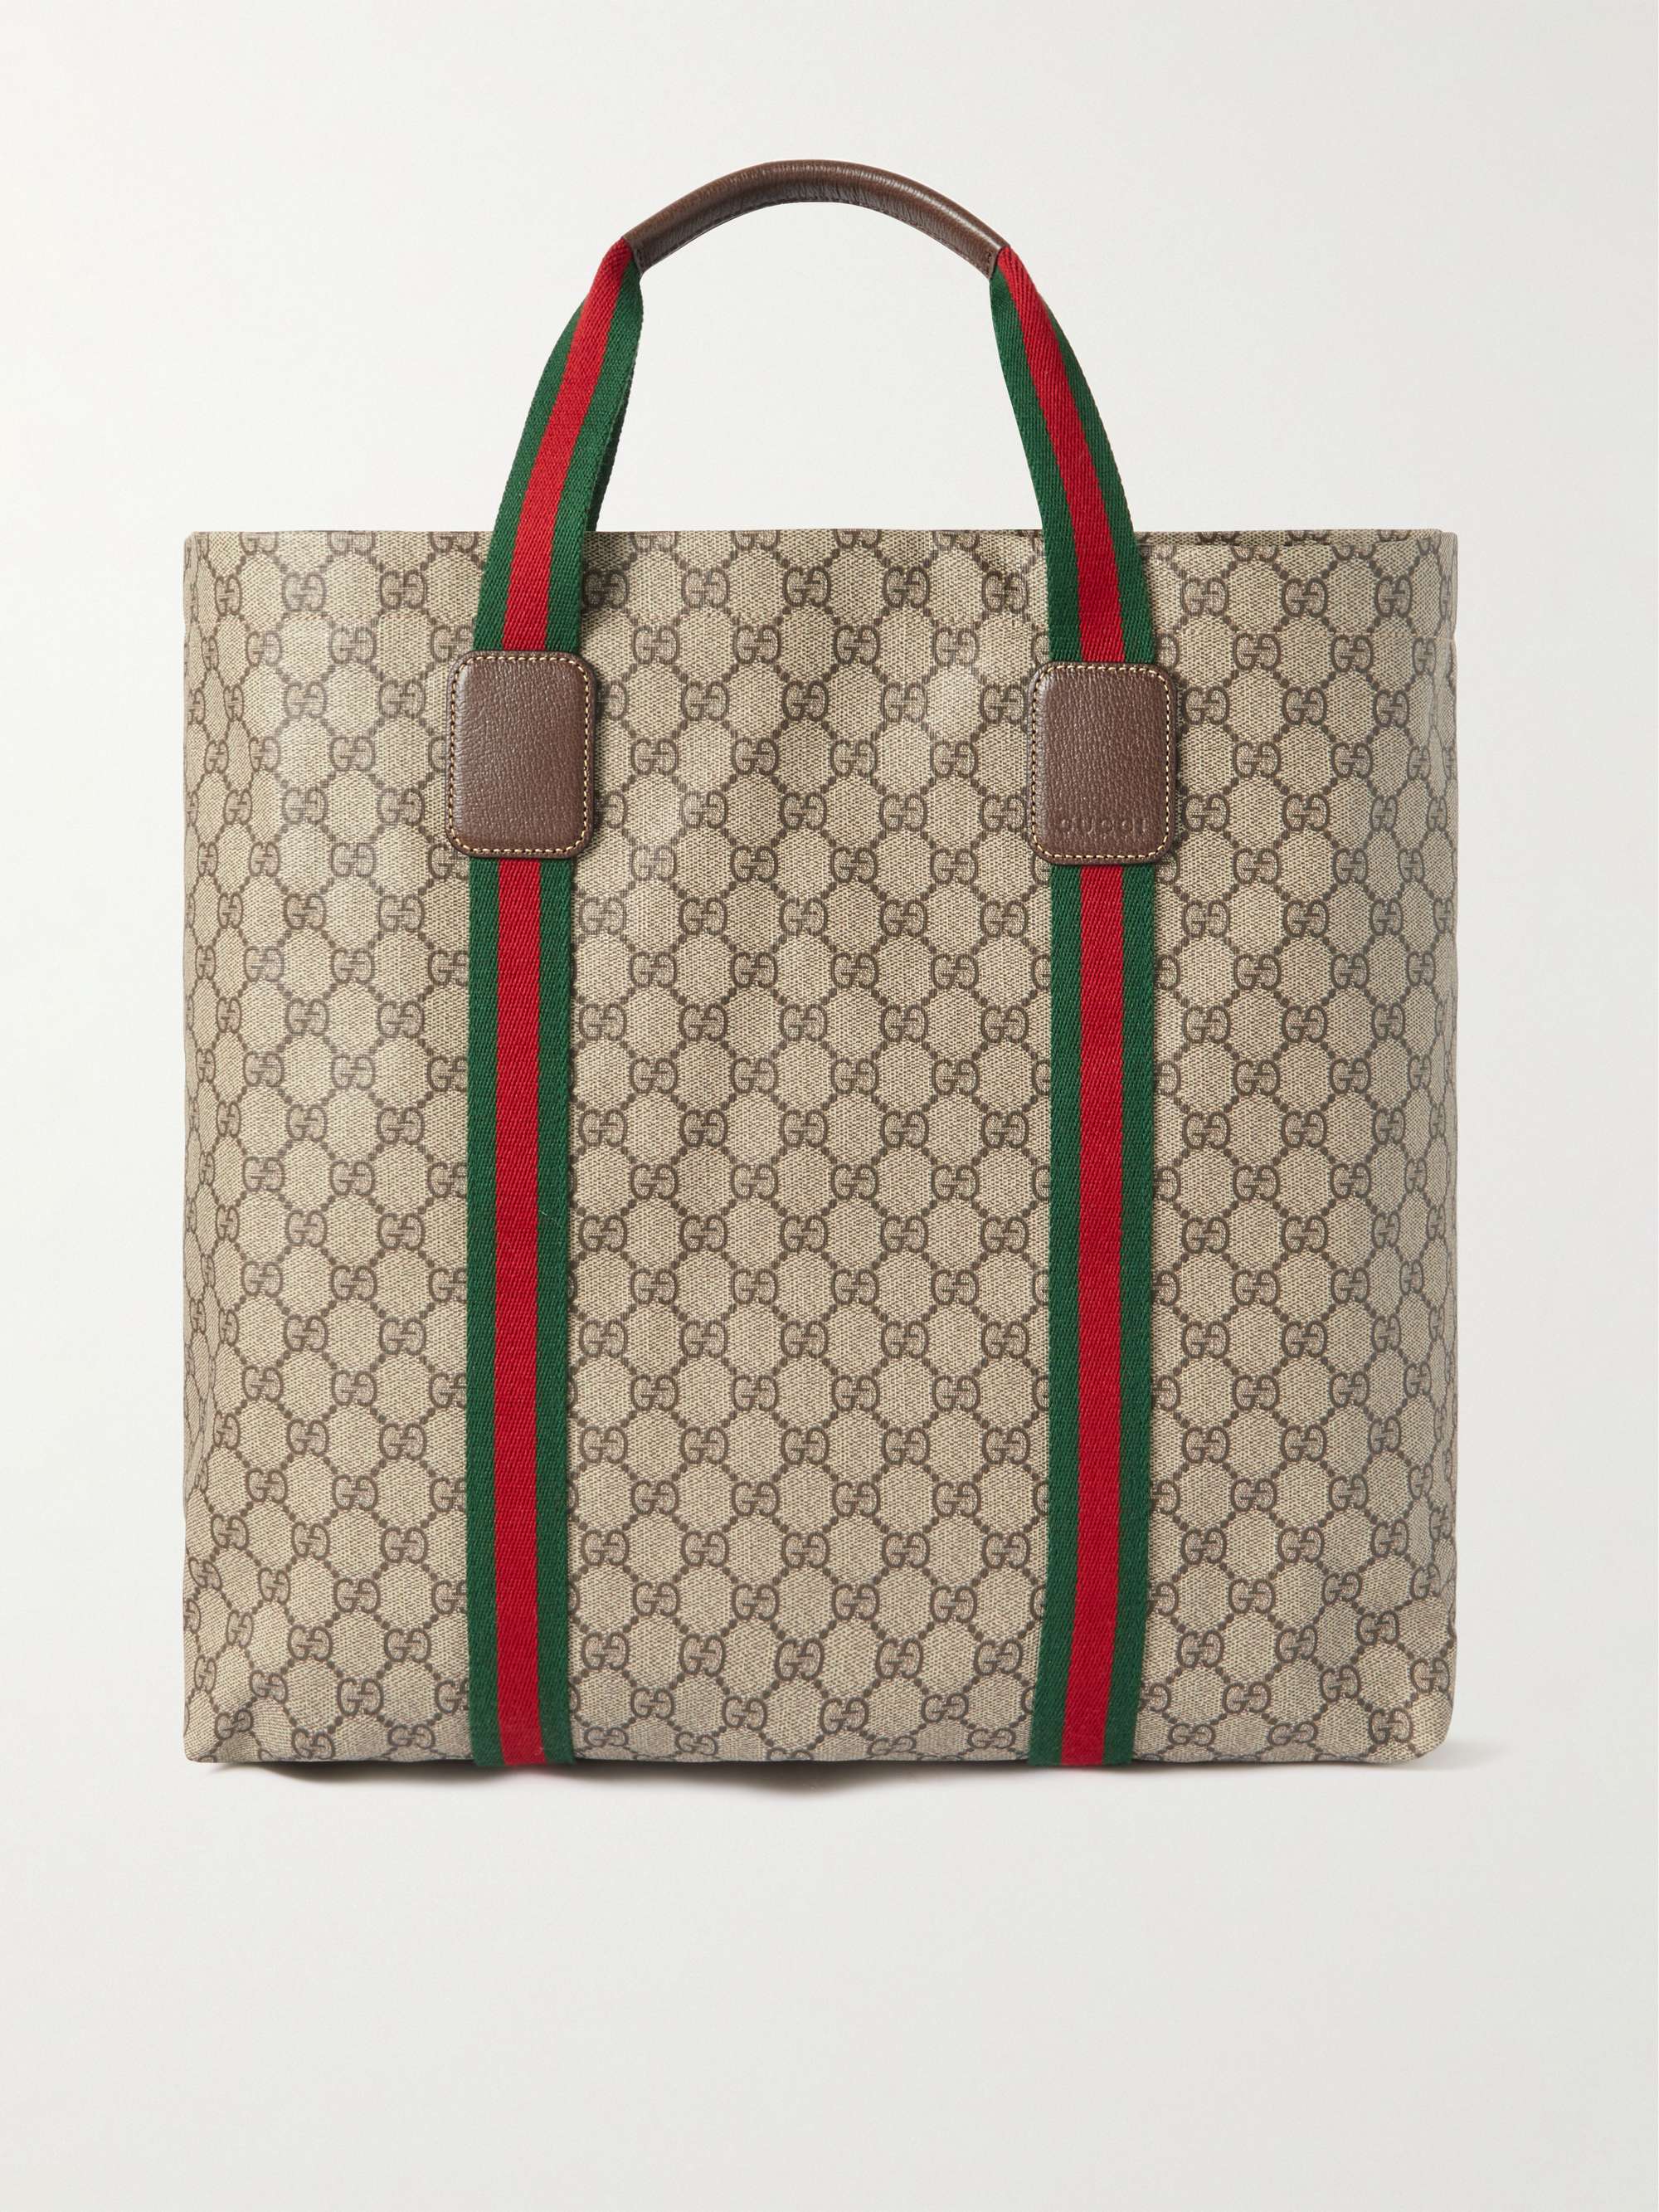 GUCCI GG Supreme Leather-Trimmed Monogrammed Coated-Canvas Tote